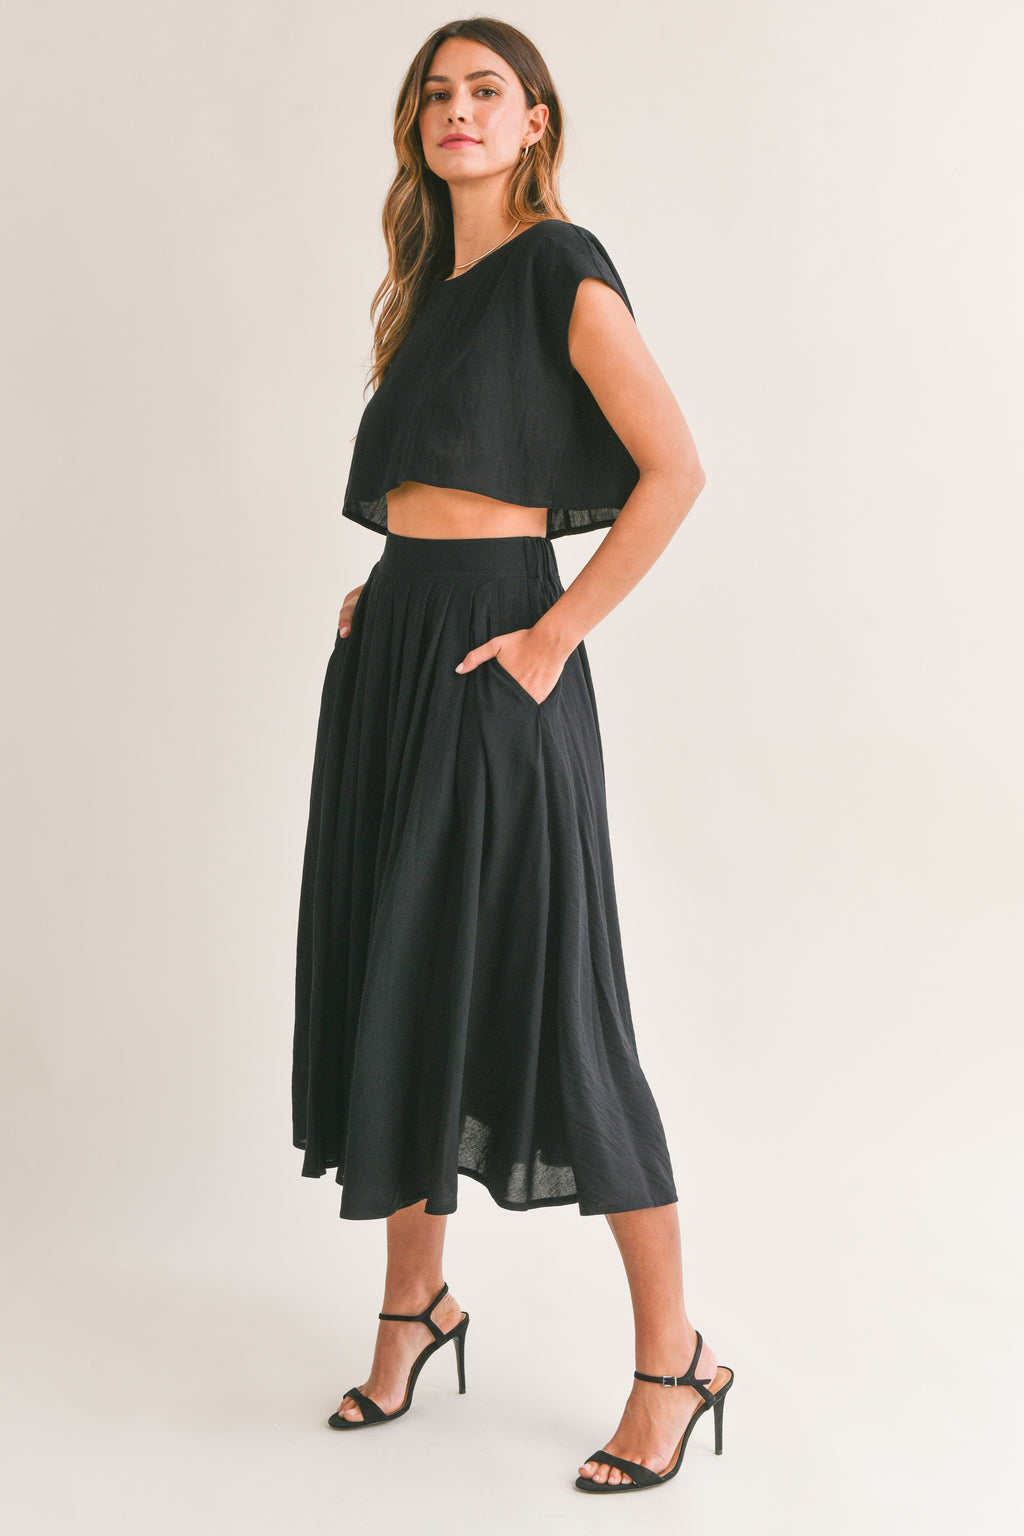 Creamsicle Two Piece Skirt Set in Black